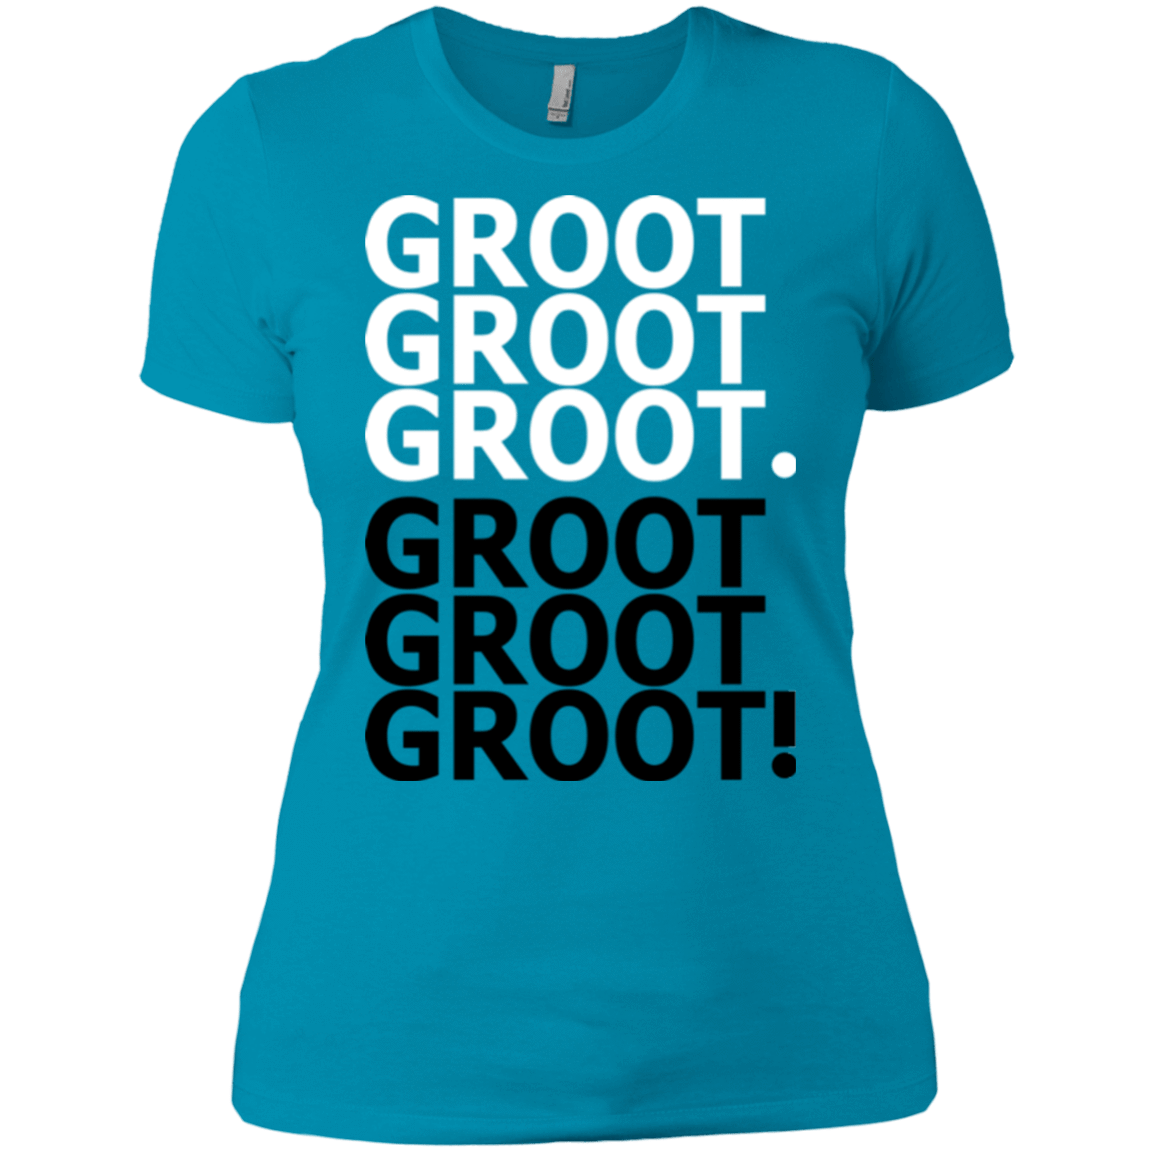 T-Shirts Turquoise / X-Small Get over it Groot Women's Premium T-Shirt